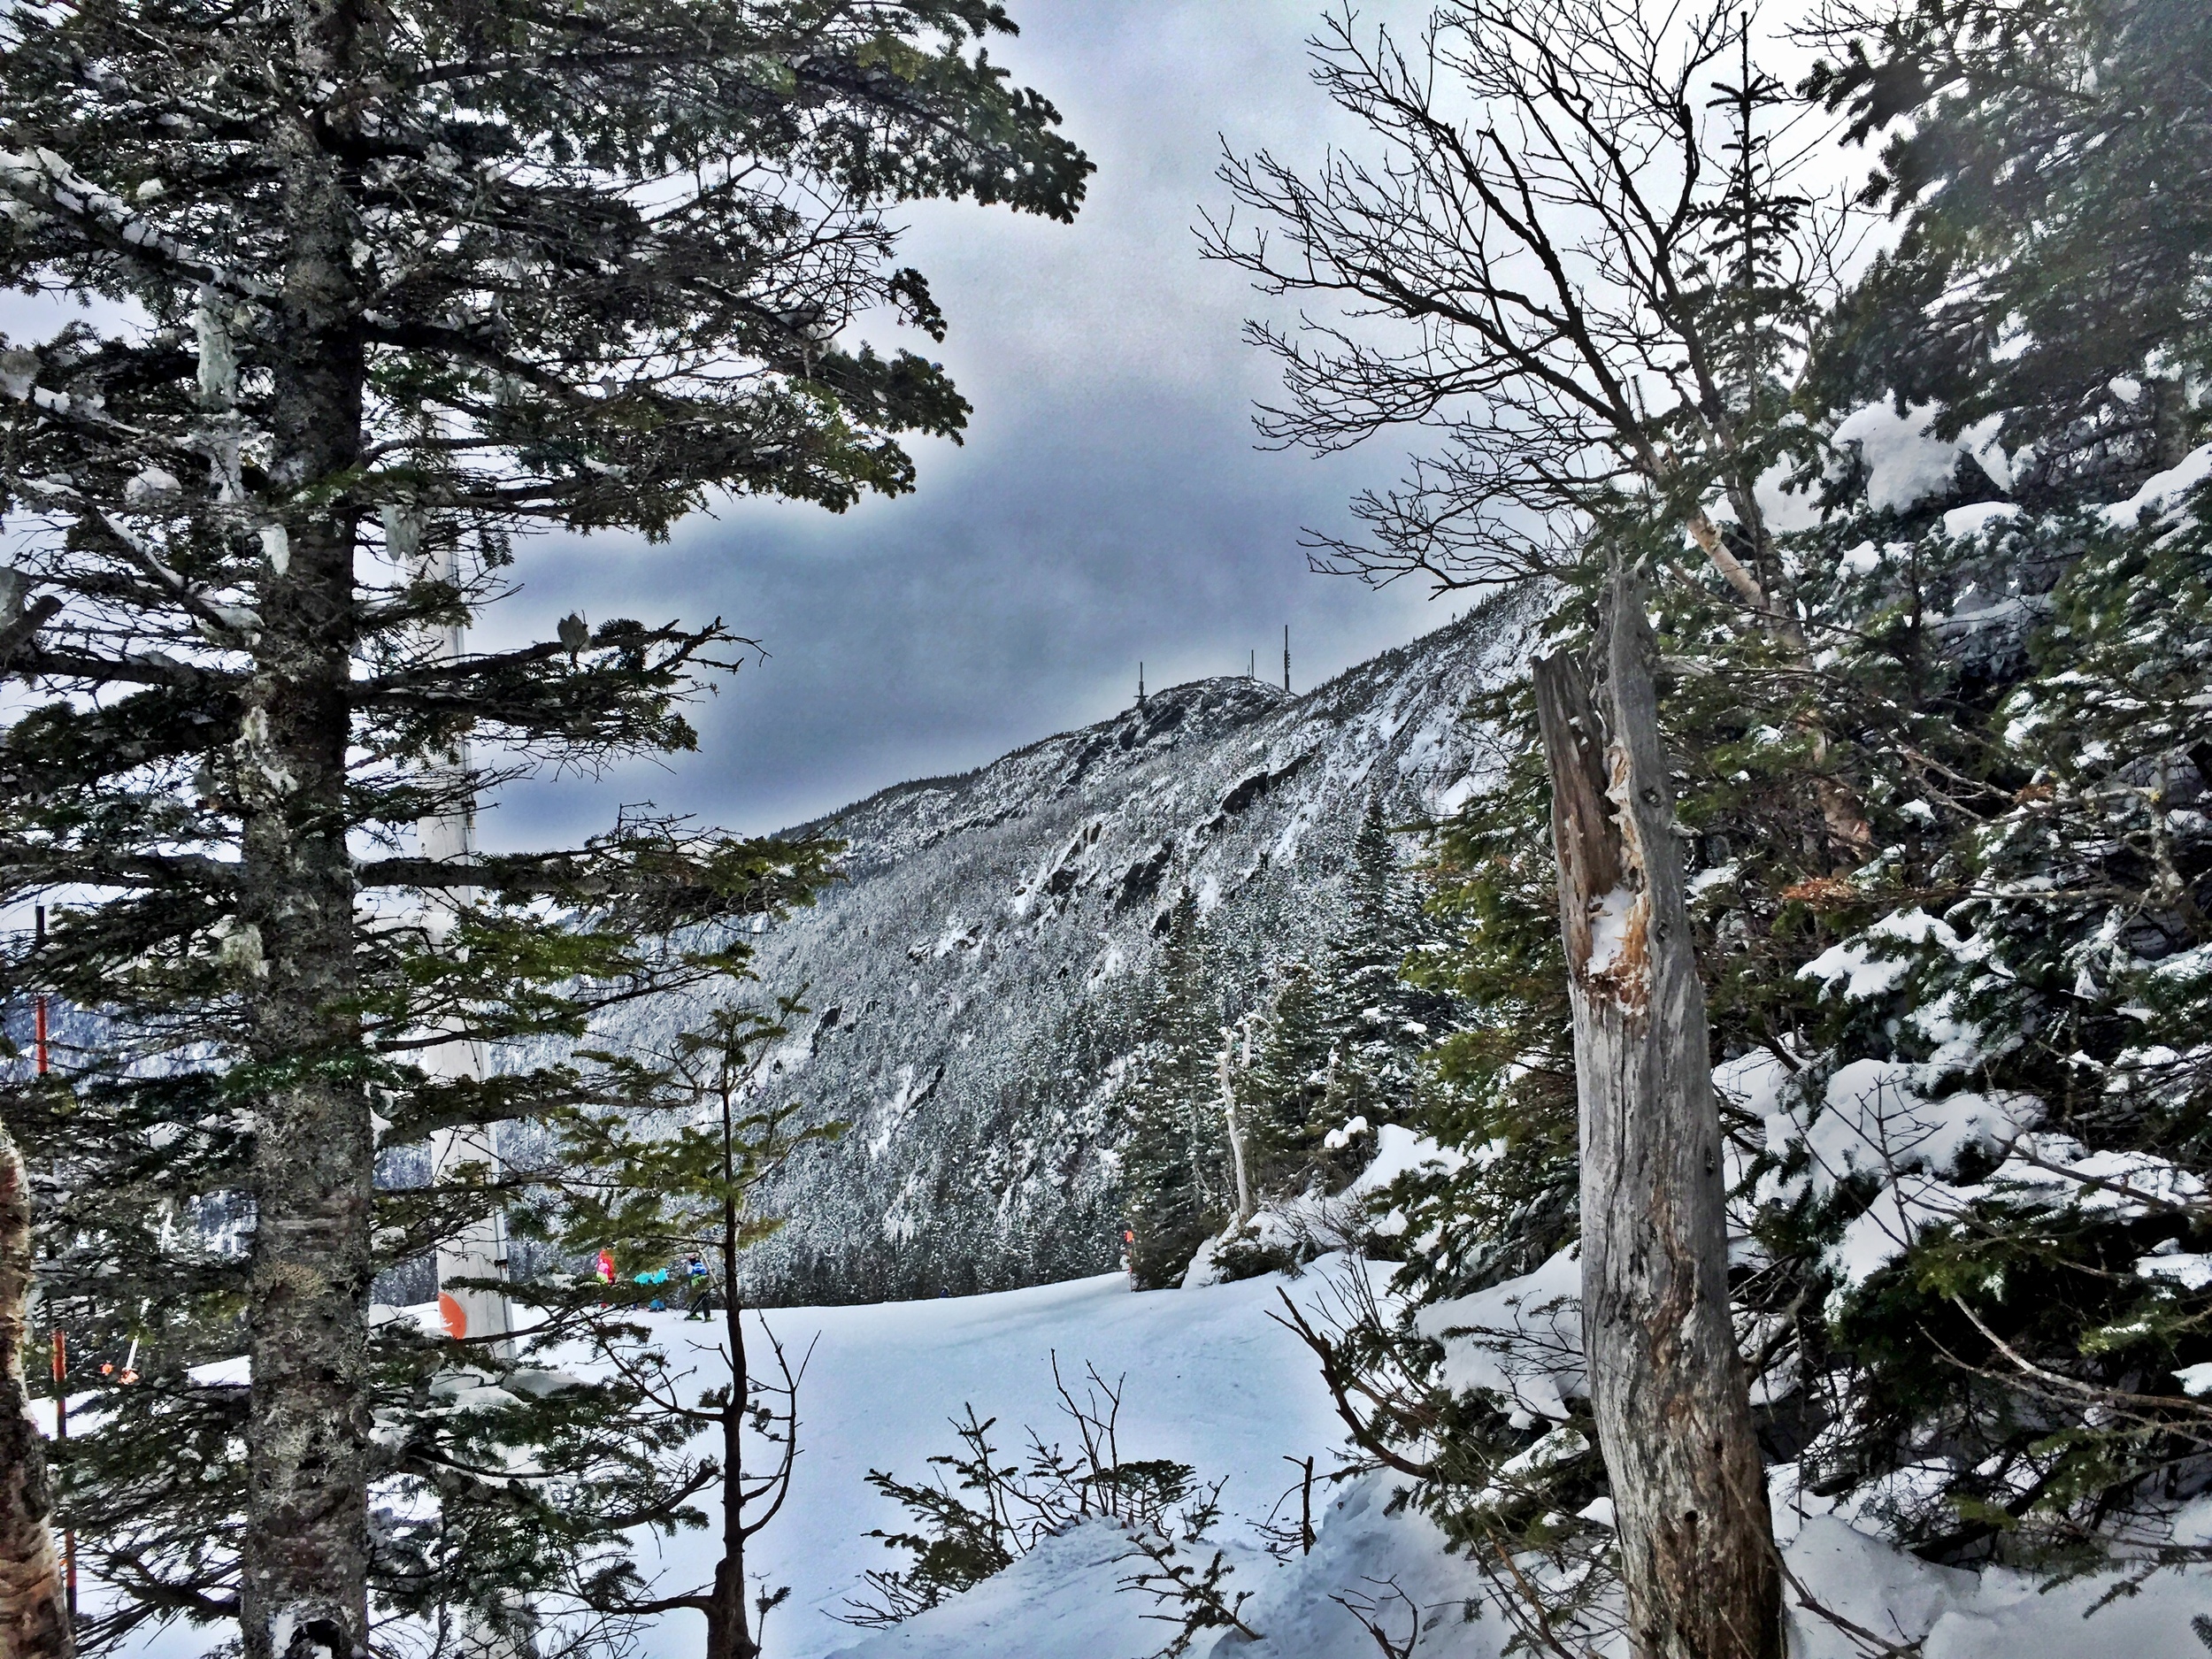 Grungy Slopes, Stowe Vermont, Stowe Mountain Lodge 26.jpg